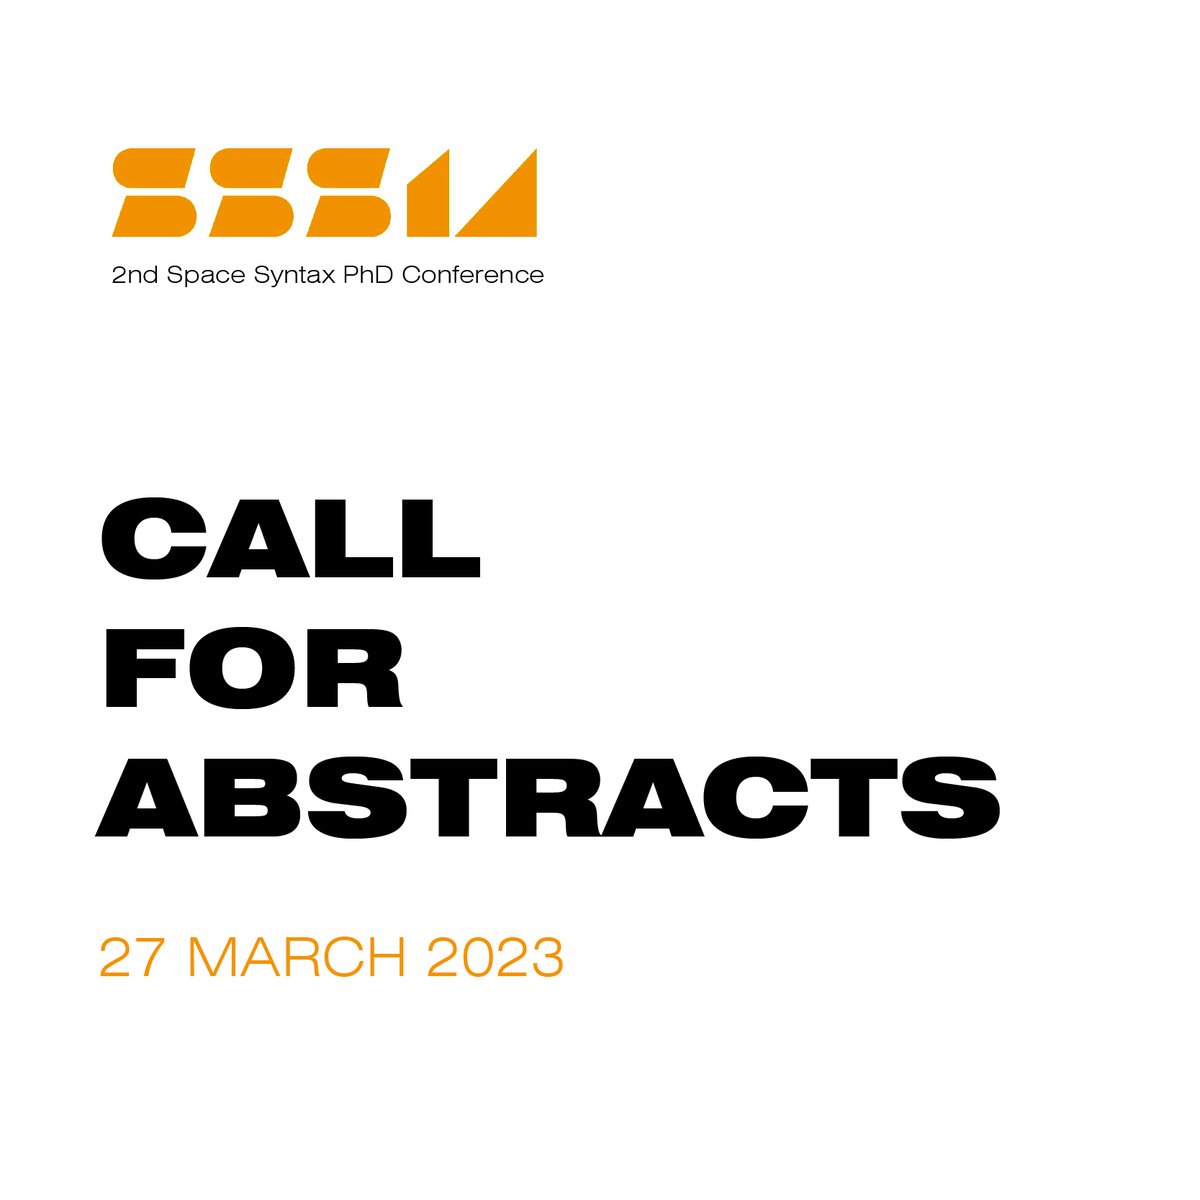 If you are a PhD student and you are using space syntax methods in your research, the 2nd Space Syntax PhD conference in June 2023 is for you! Abstract Submission Deadline: 27 March 2023 Here you can find all the details for the upcoming PhD conference: cyprusconferences.org/14sss/the-phd-…